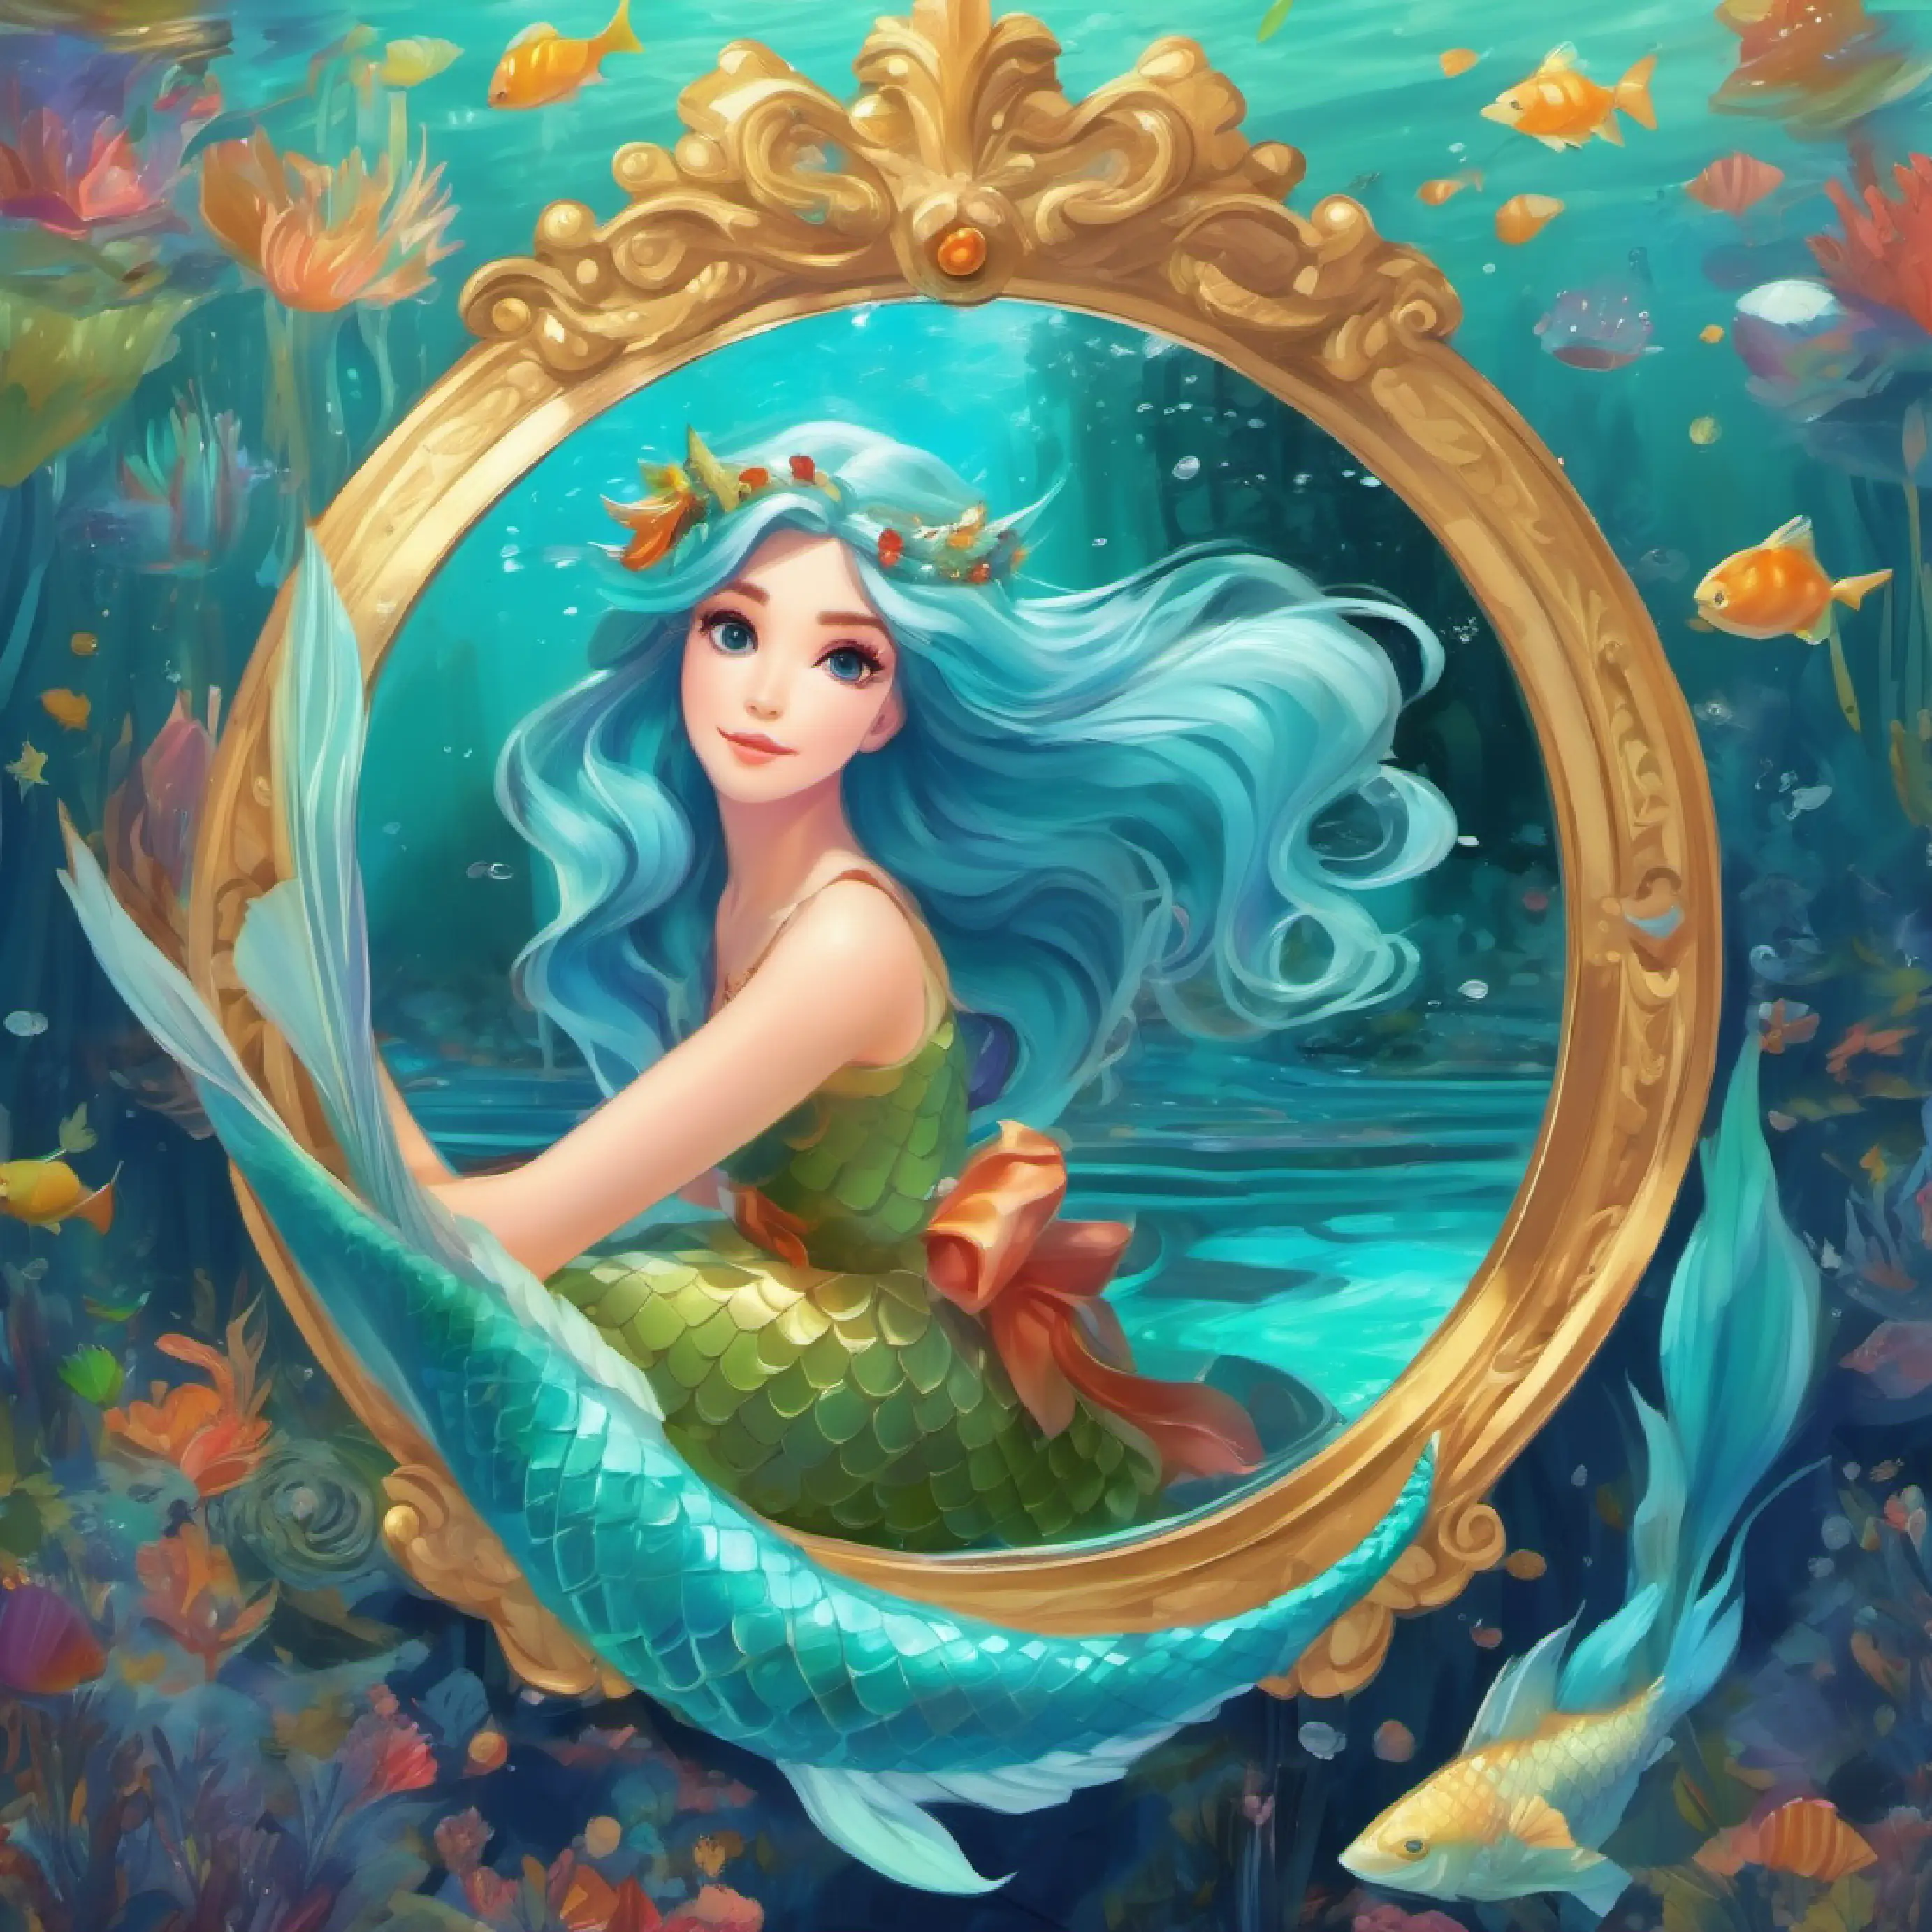 The mirror brings happiness, Mermaid princess with sky-blue tail and long aqua hair plans more adventures.